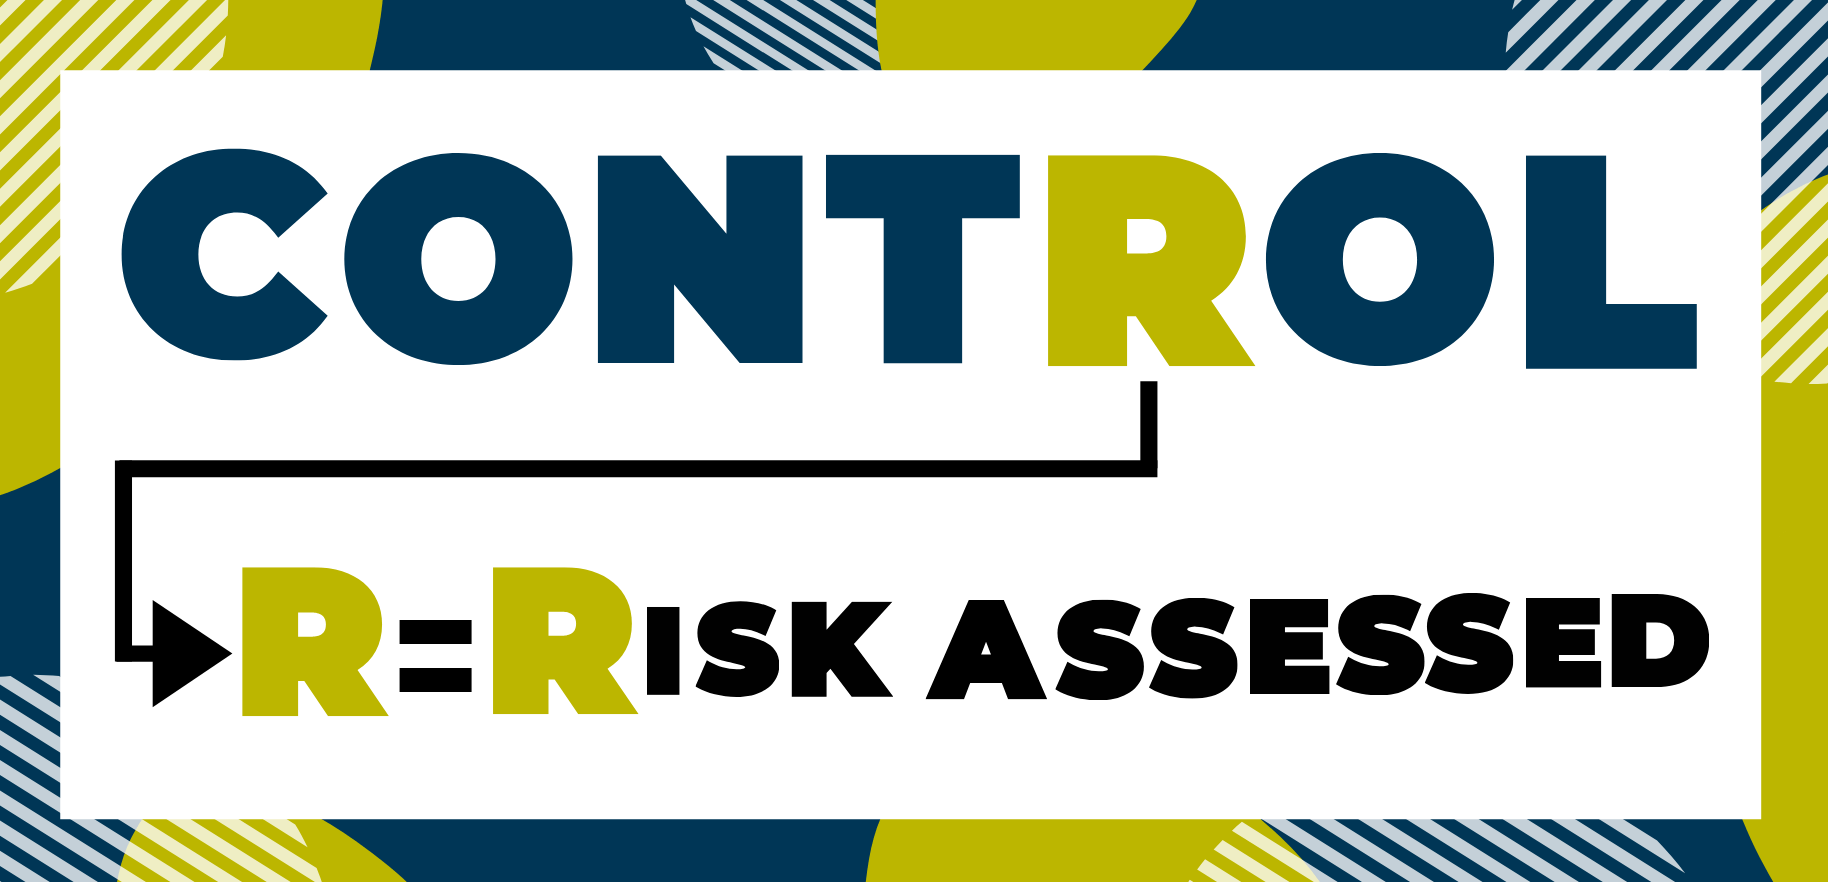 Letter r in control. R = risk assessed.